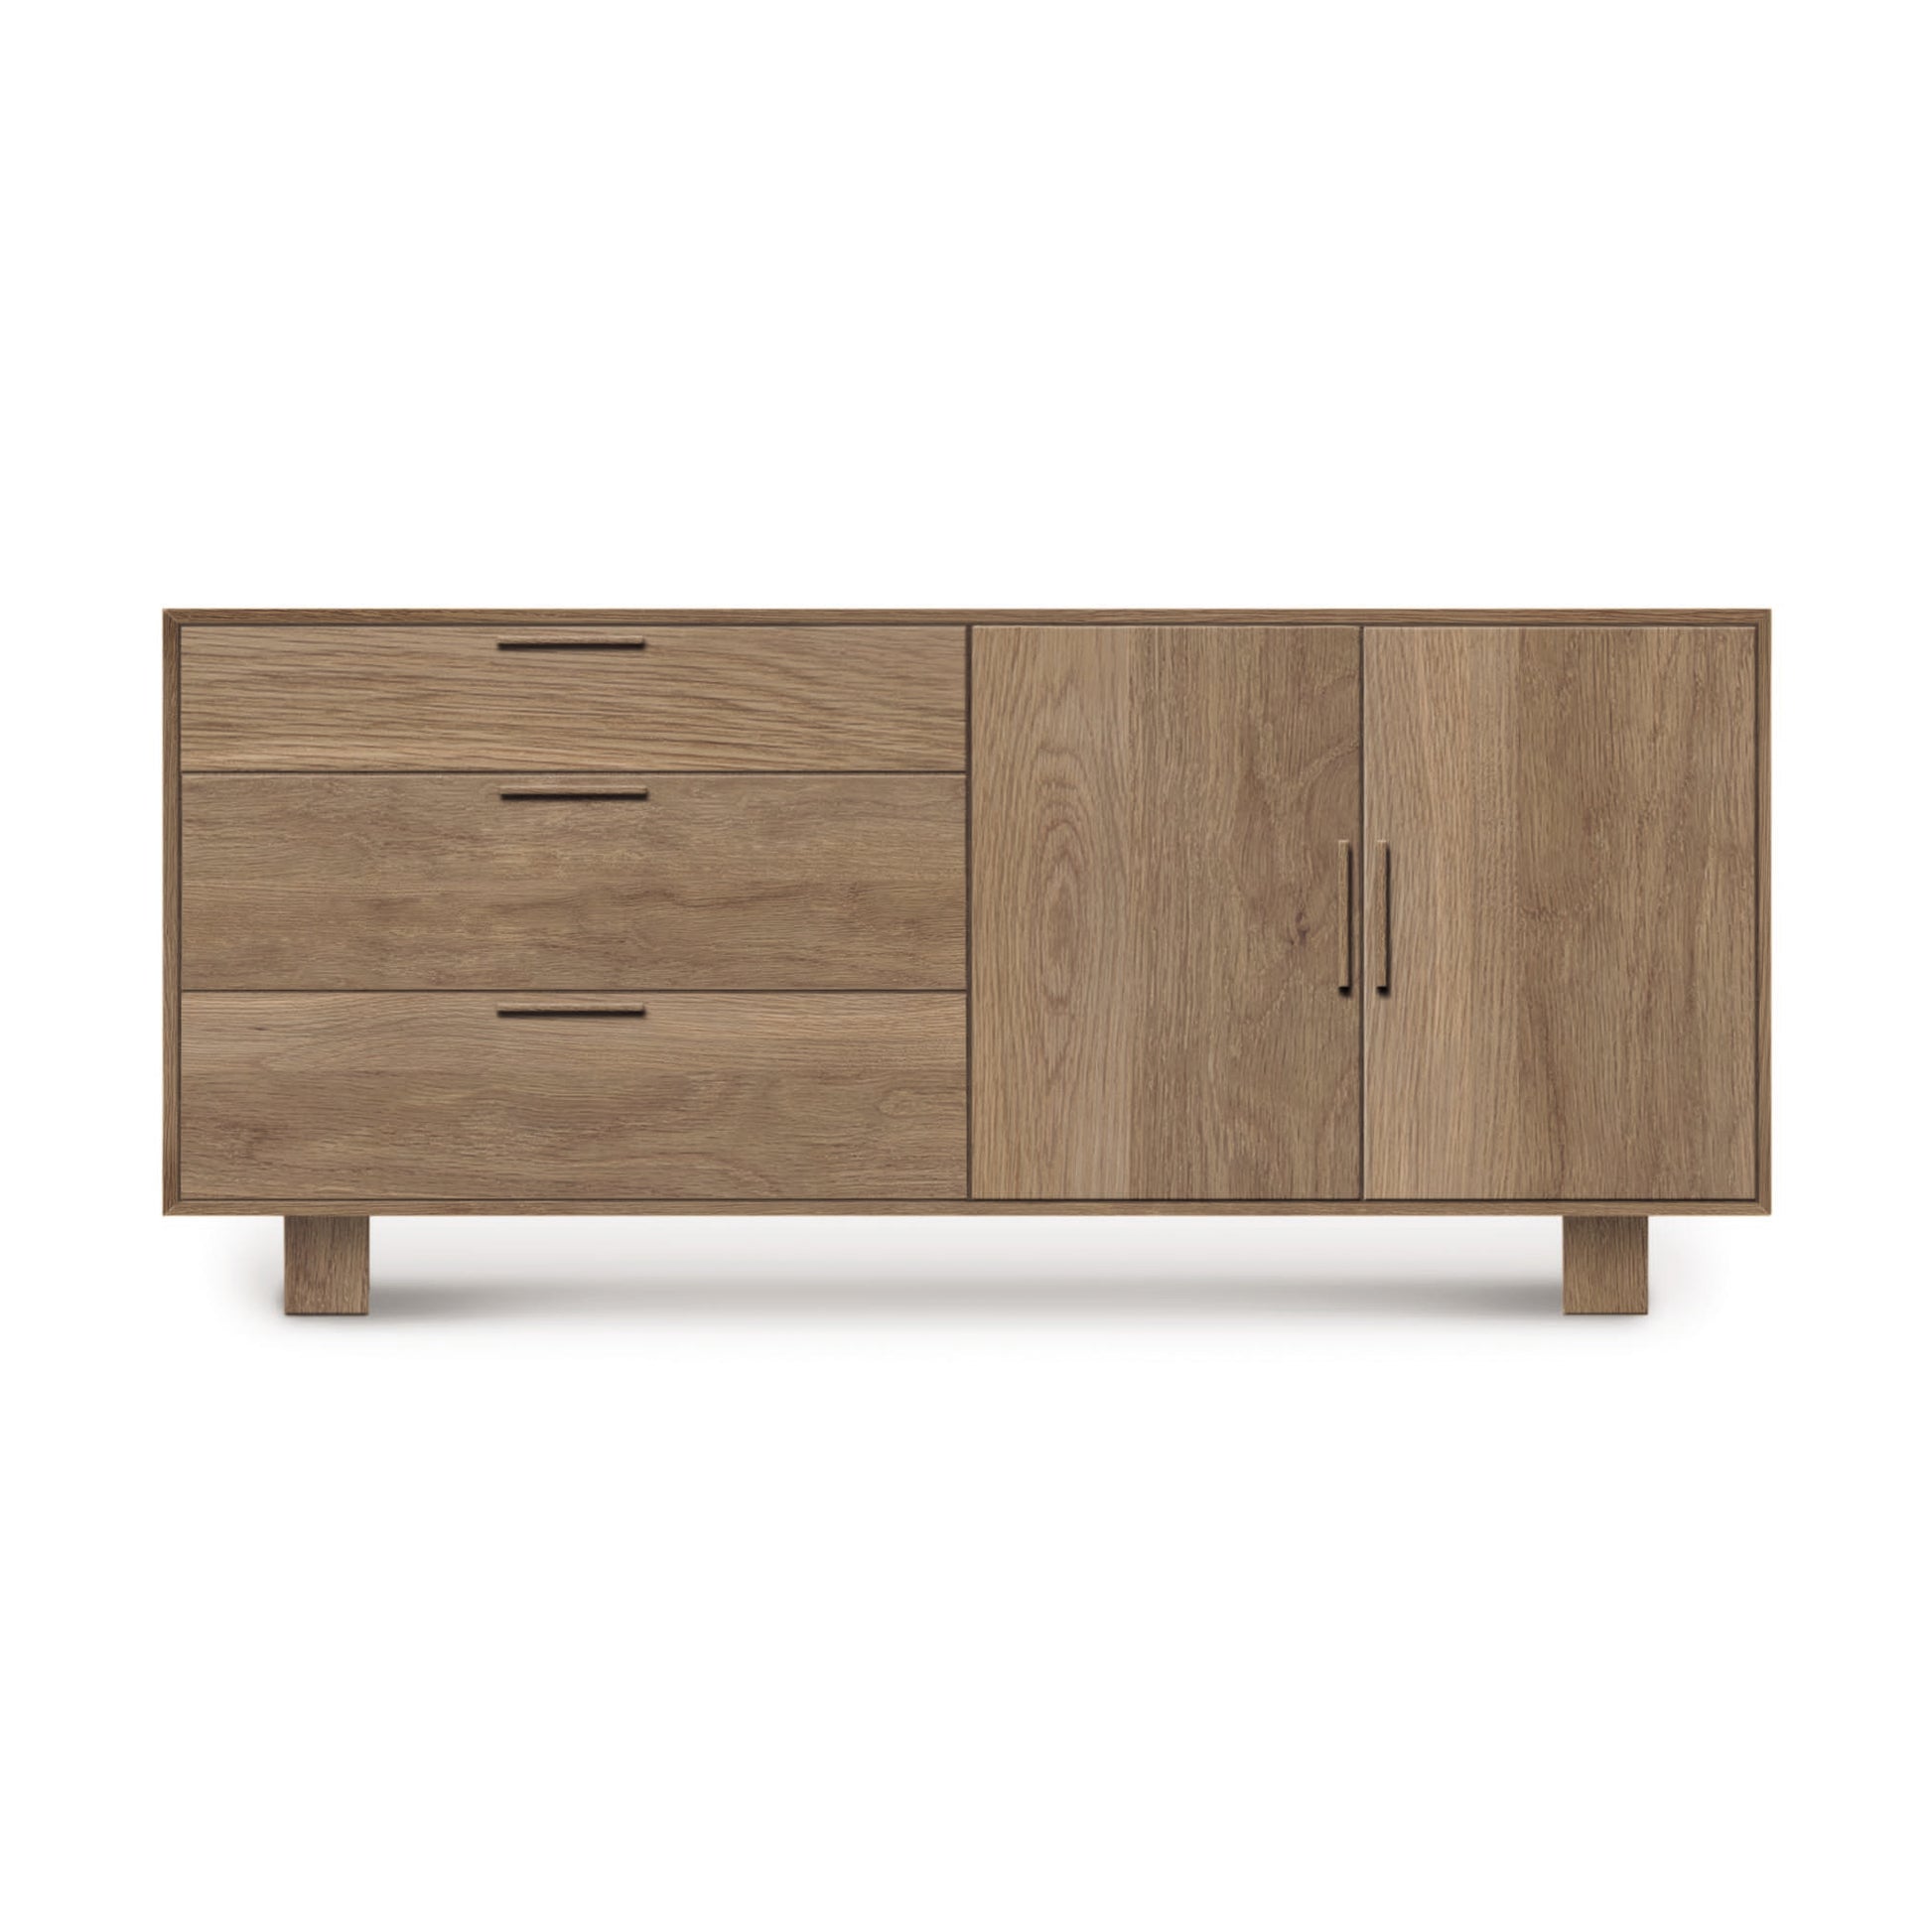 A modern Copeland Furniture Iso 2 Door, 3 Side Drawer Buffet with three drawers on the left and two doors on the right, all showcasing solid wood construction, set against a plain white background.